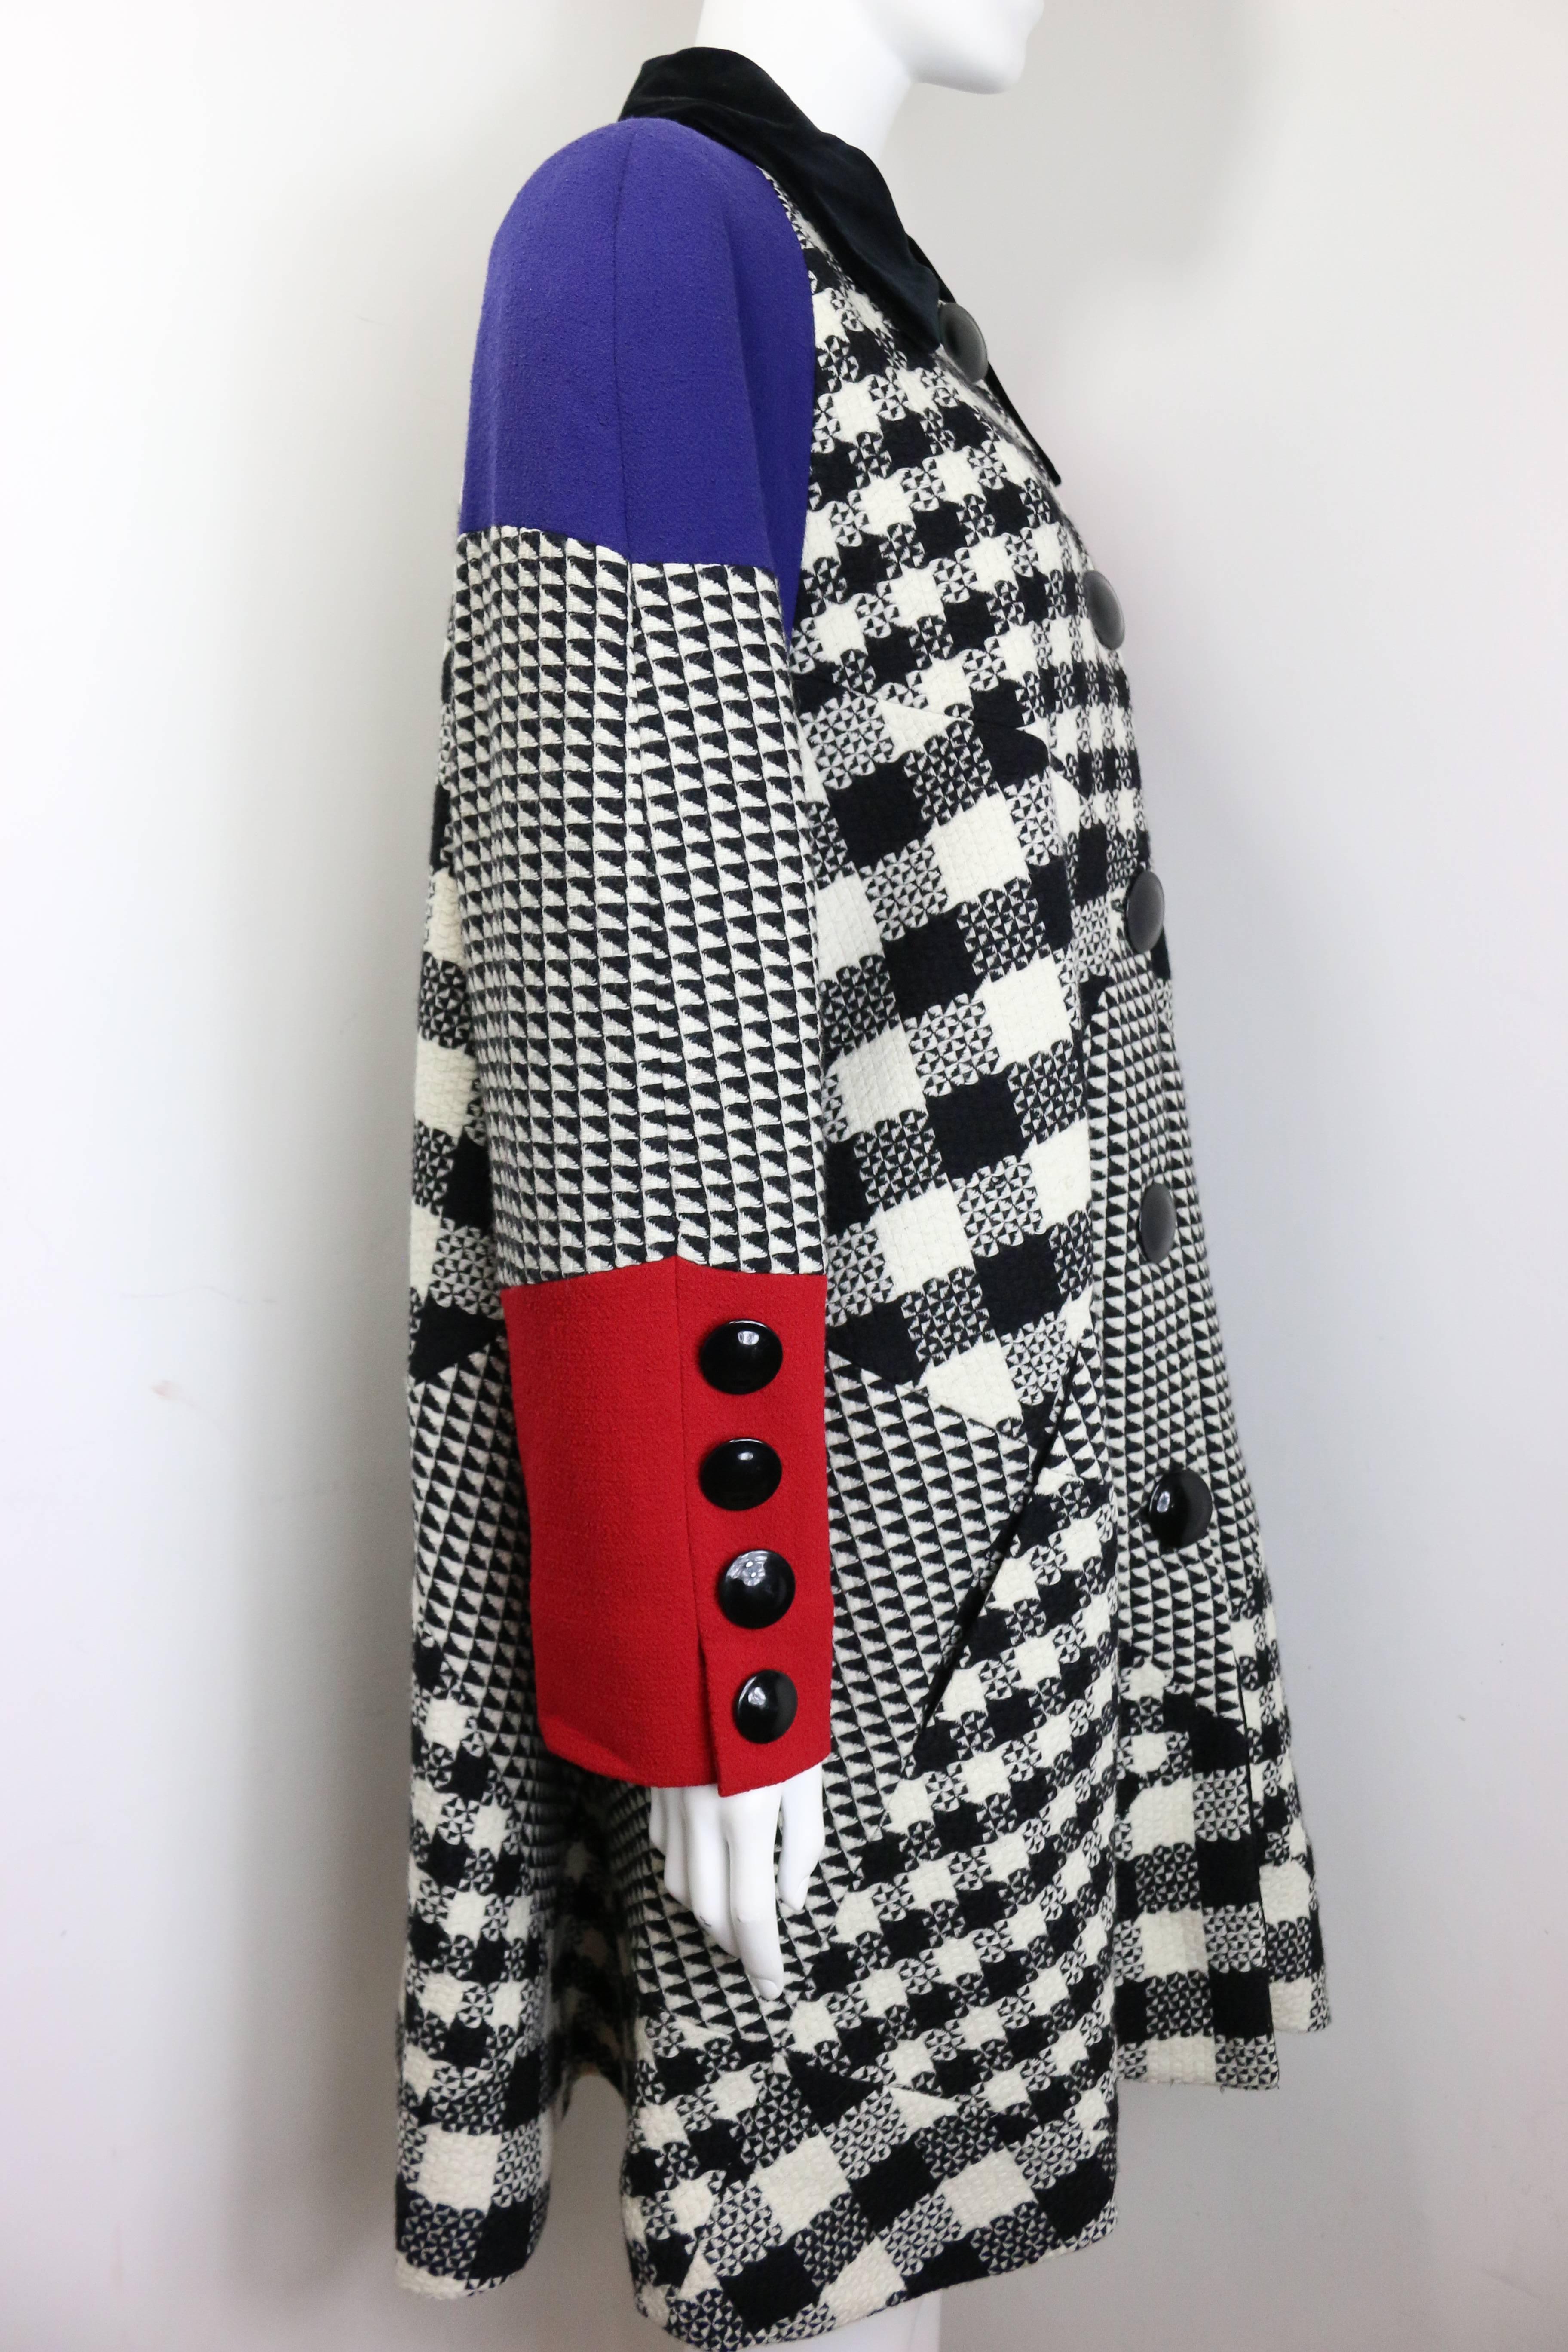 80s Roccobarocco Colour Blocked with Check Patterns Balmacaan Coat  In Excellent Condition For Sale In Sheung Wan, HK